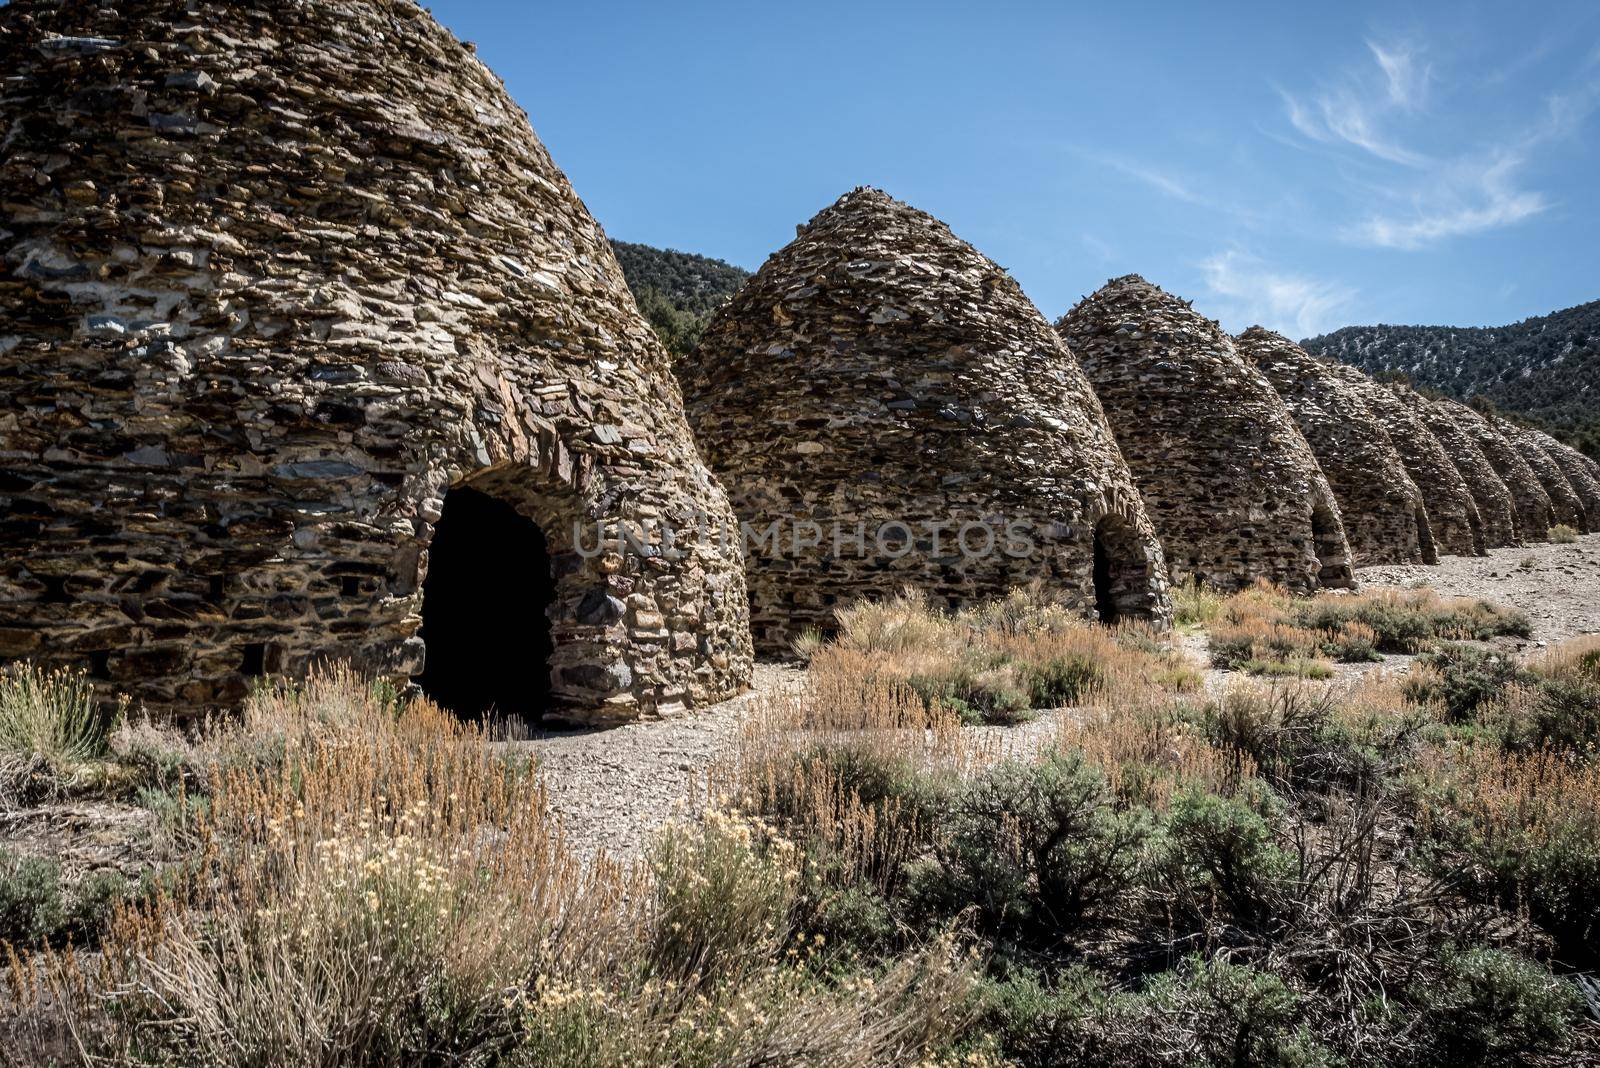 Death Valley Historical Charcoal Kilns bake in the sun